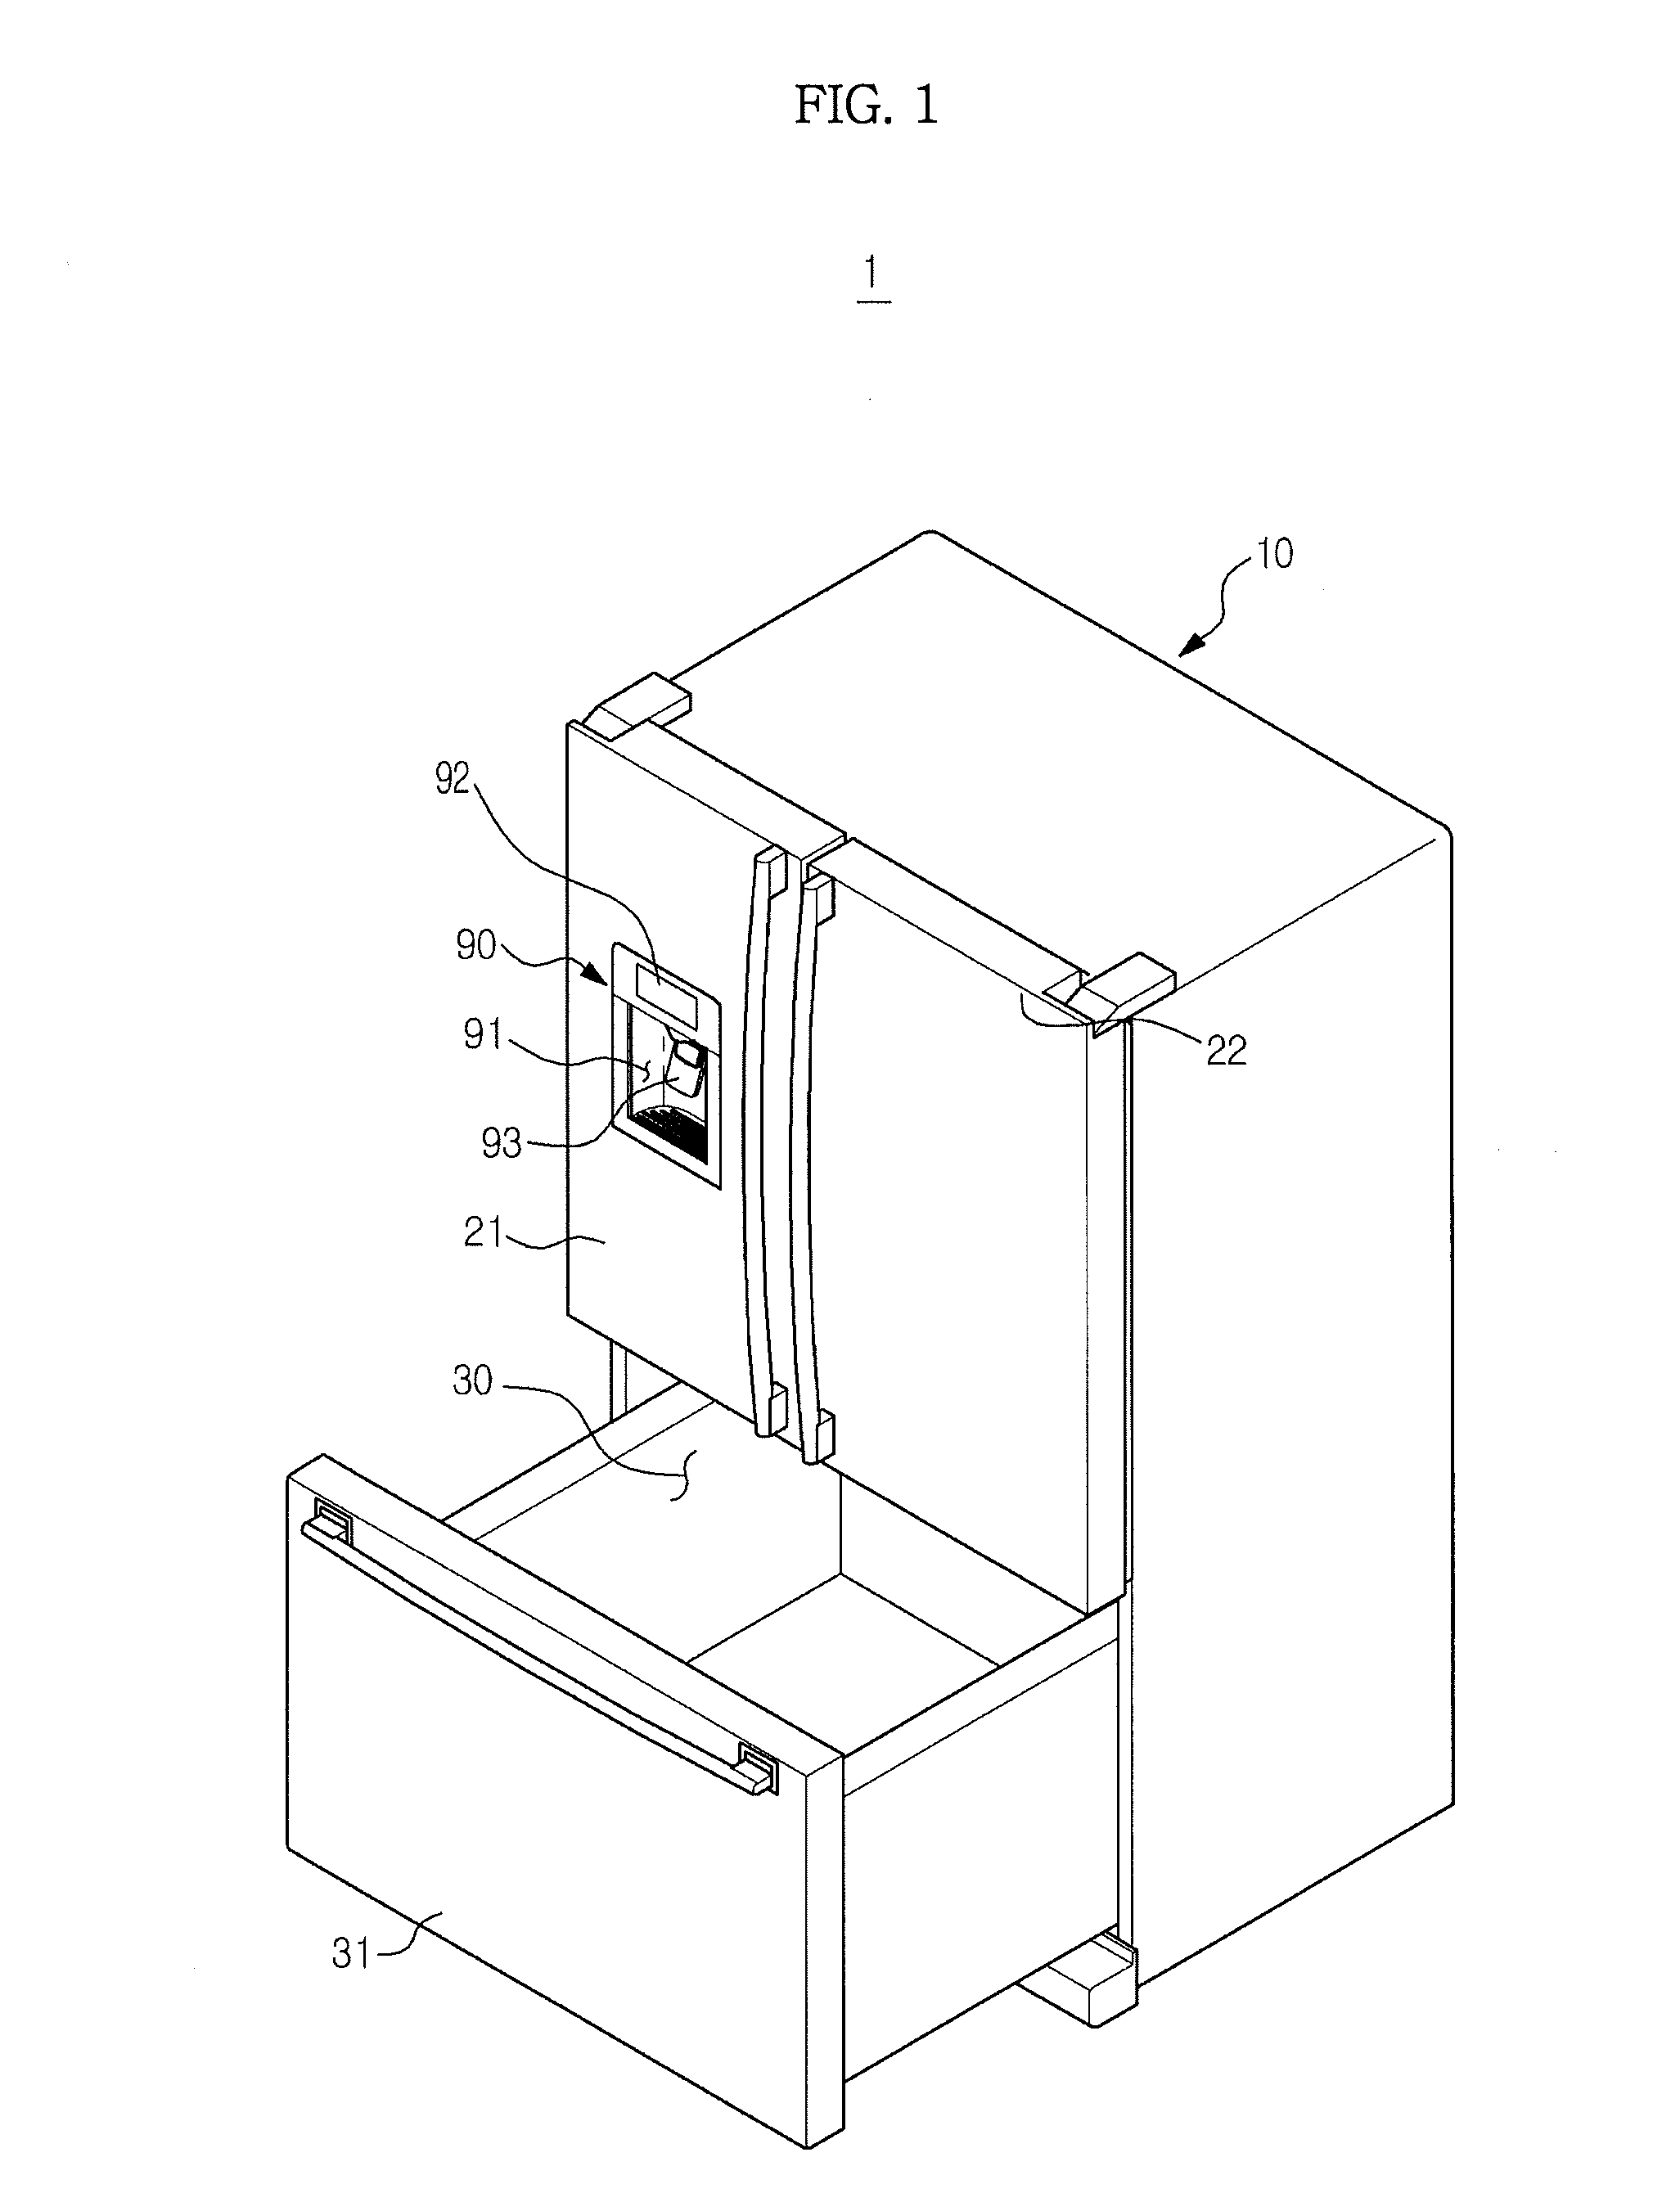 Refrigerator haiving apparatus to produce carbonated water